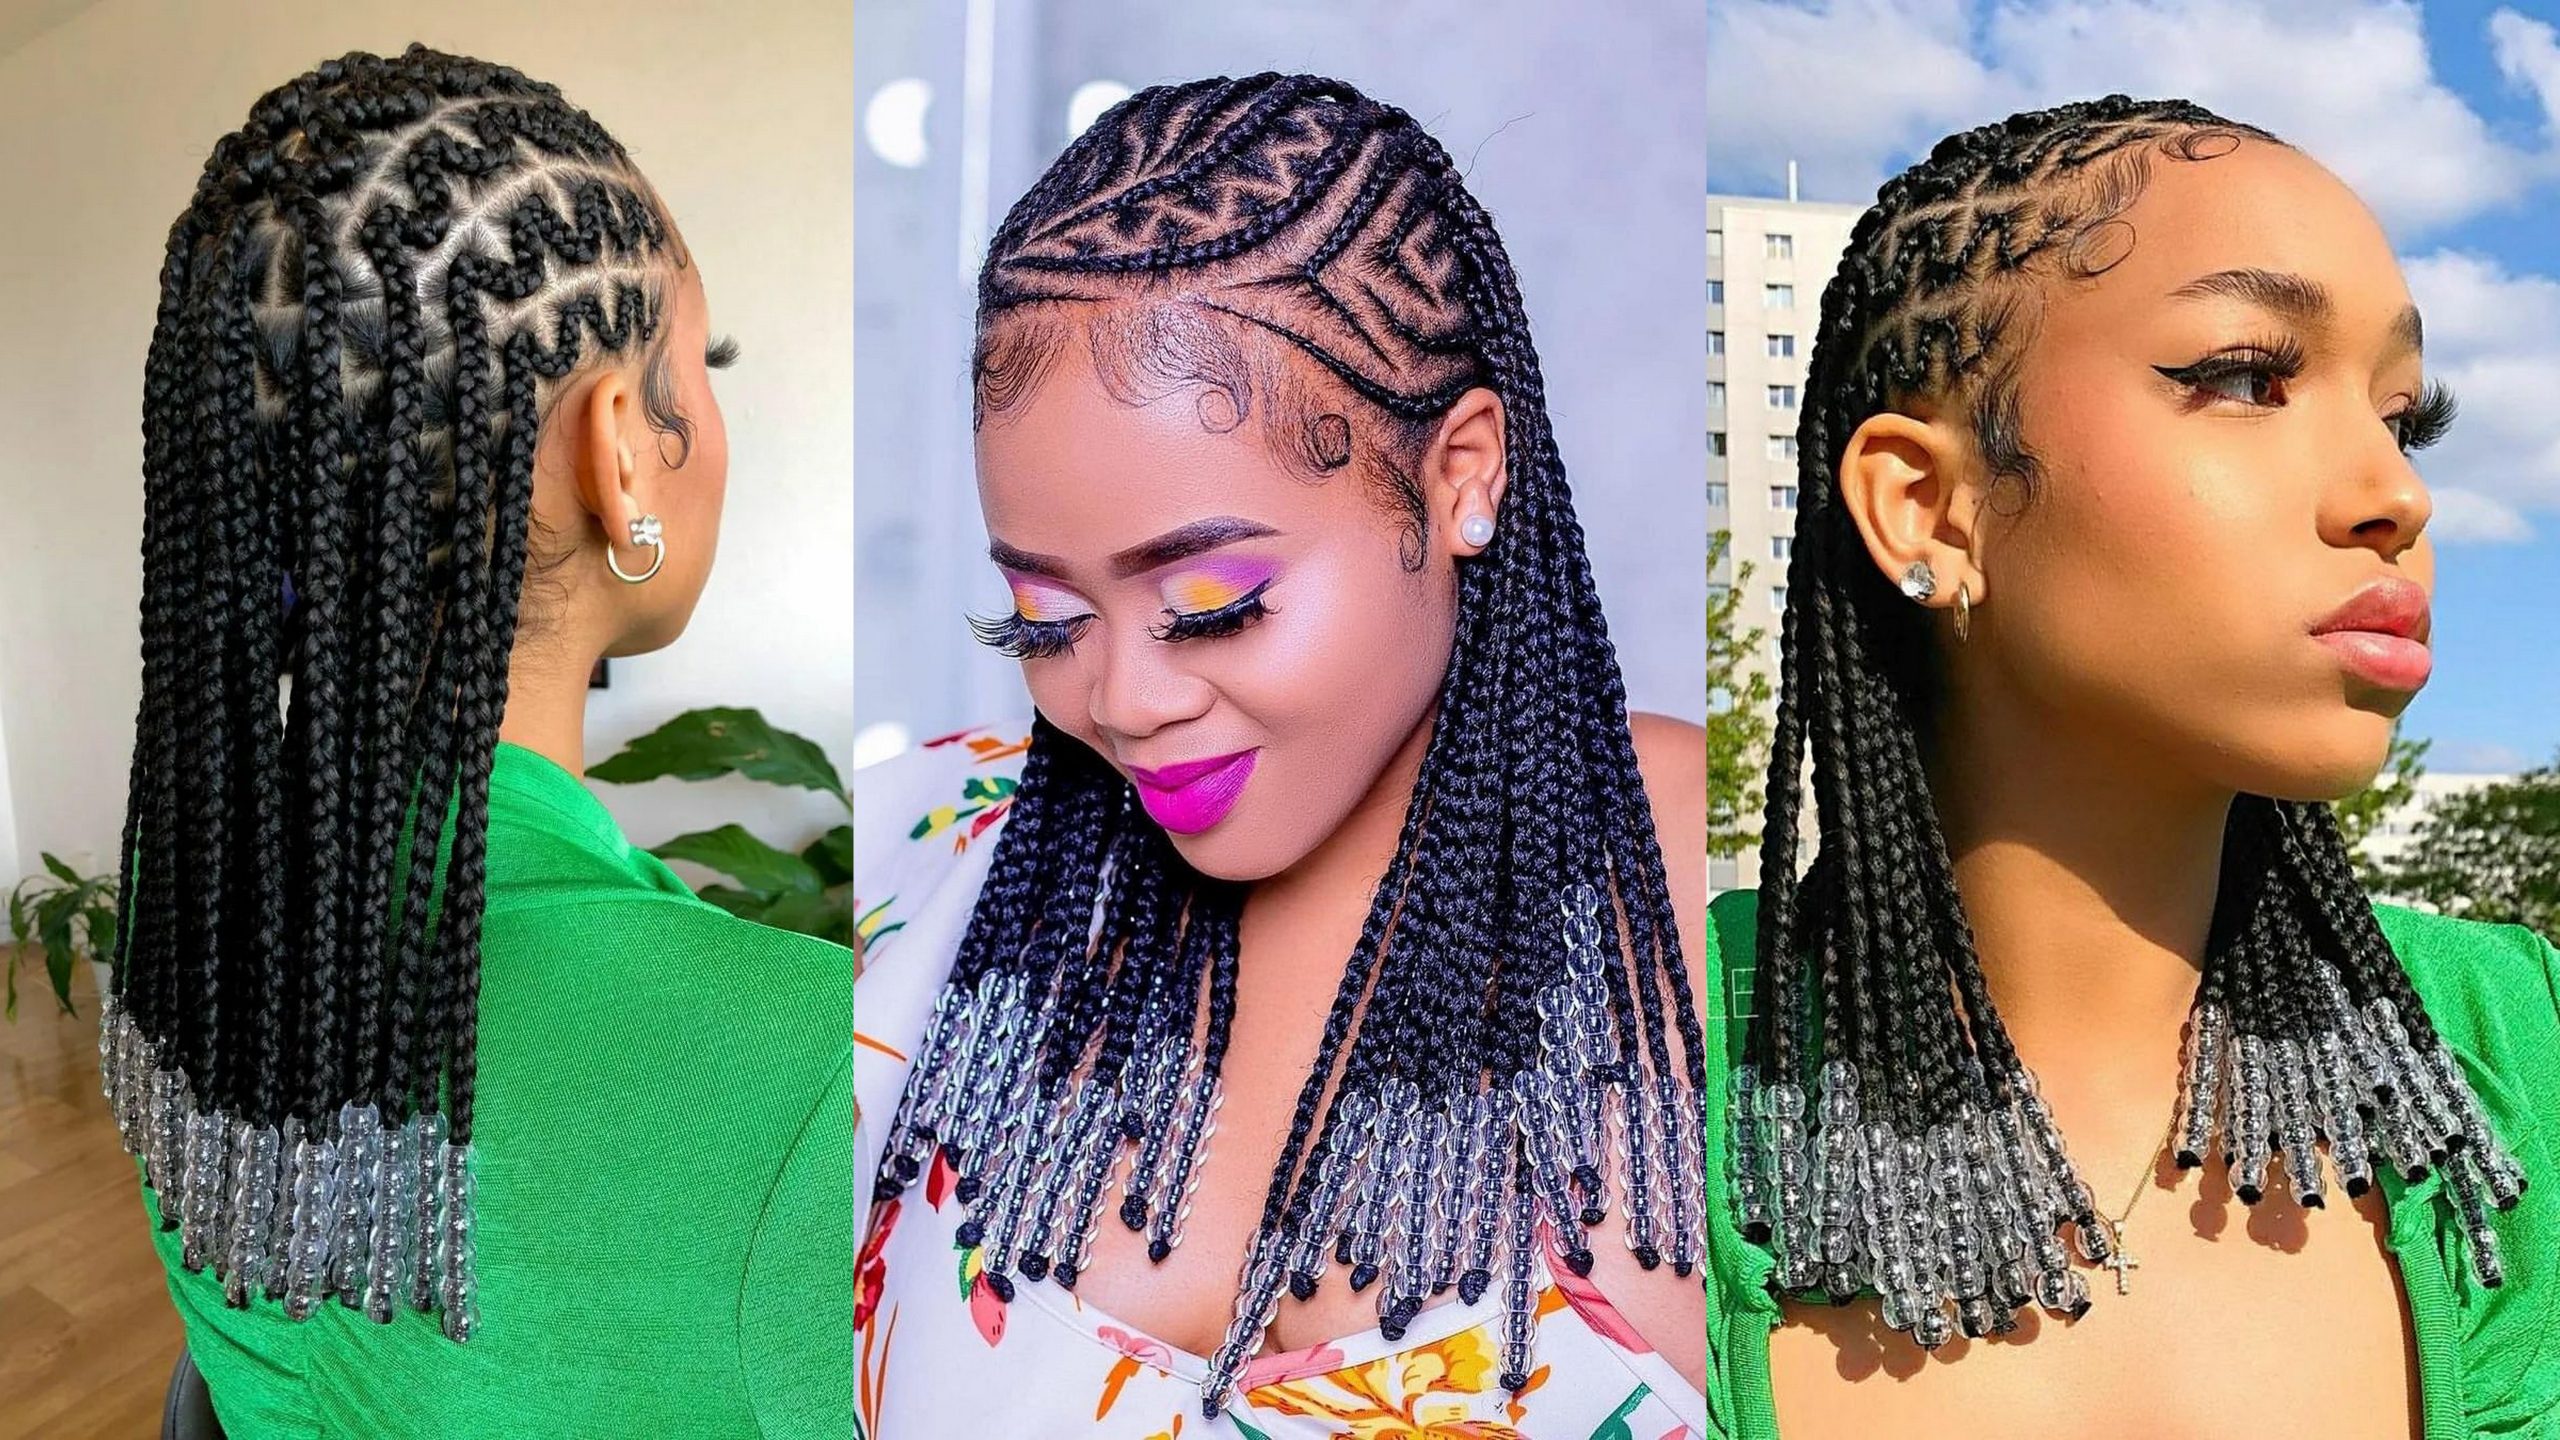 Clipkulture | hair braids with beads hairstyles